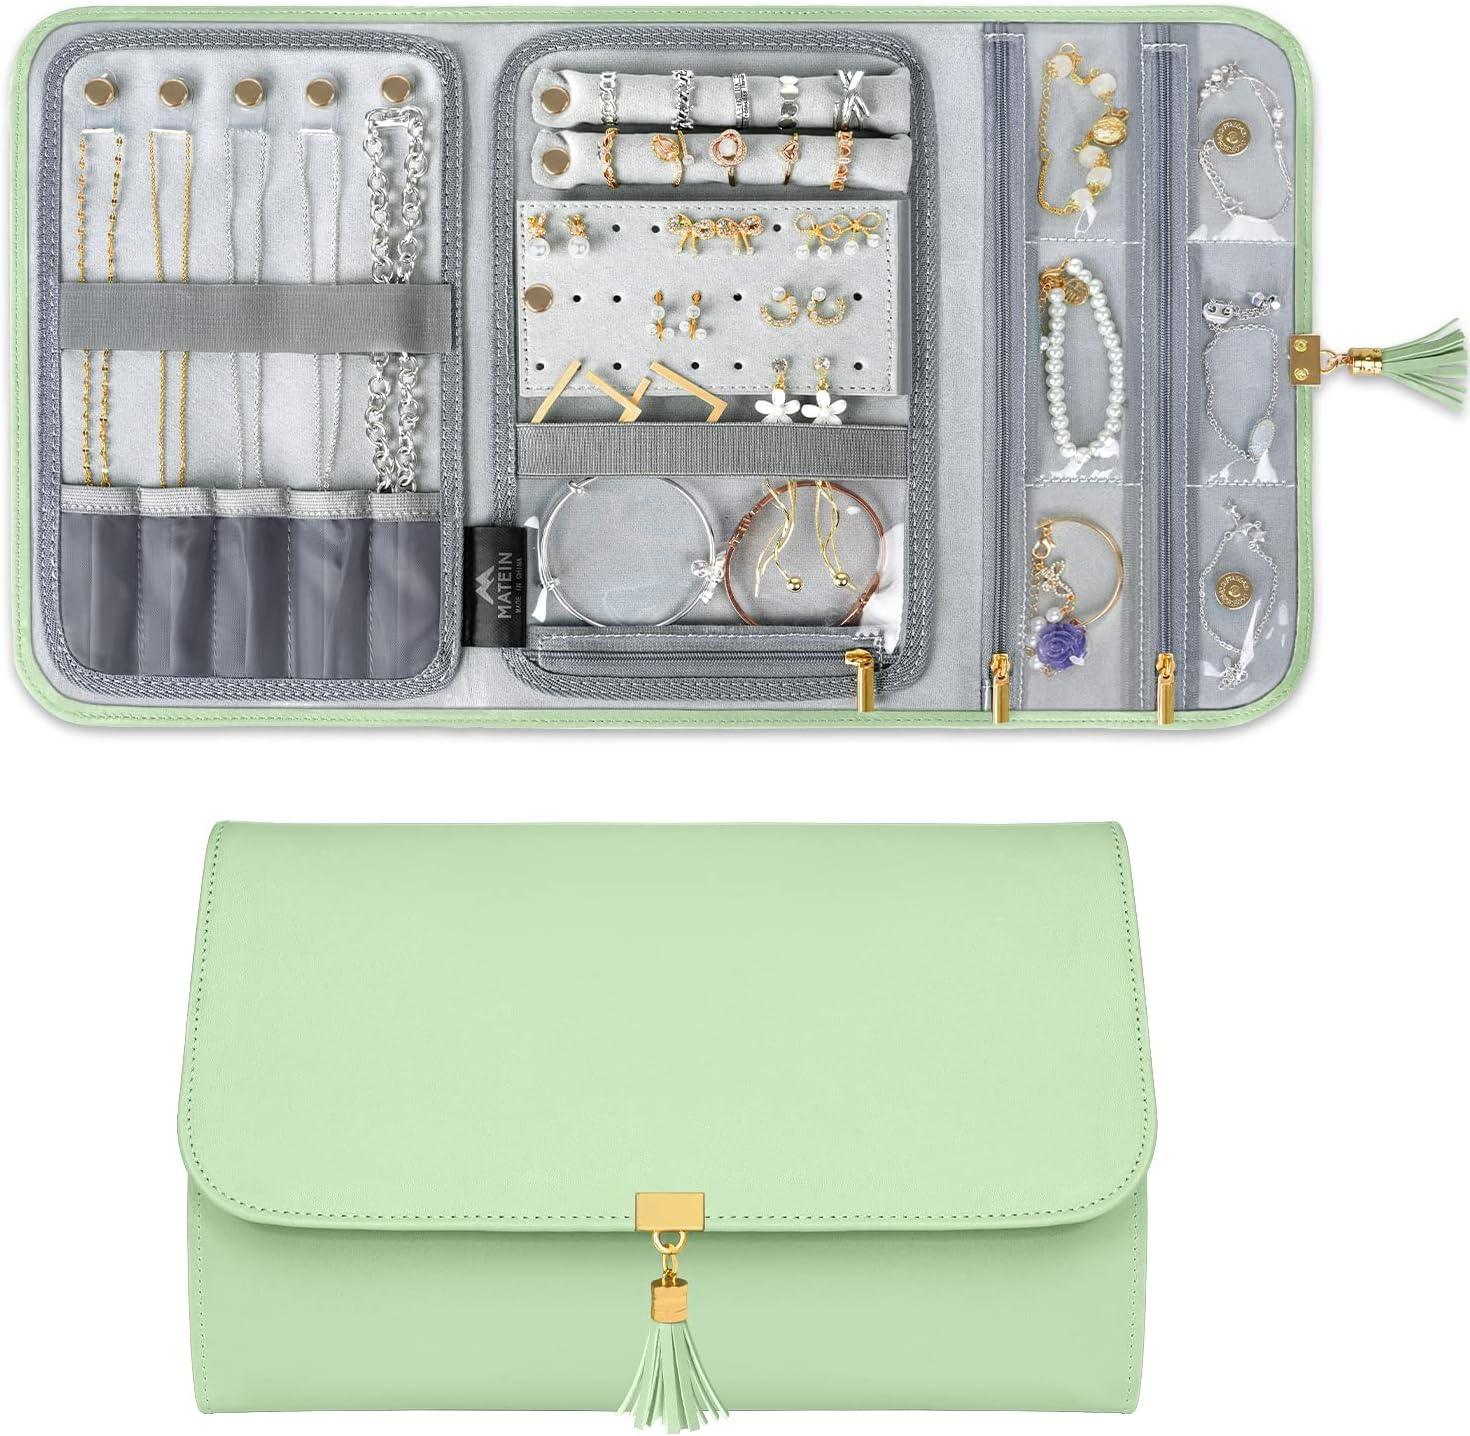 Blushbees® Compact Travel Jewelry Case in Blue